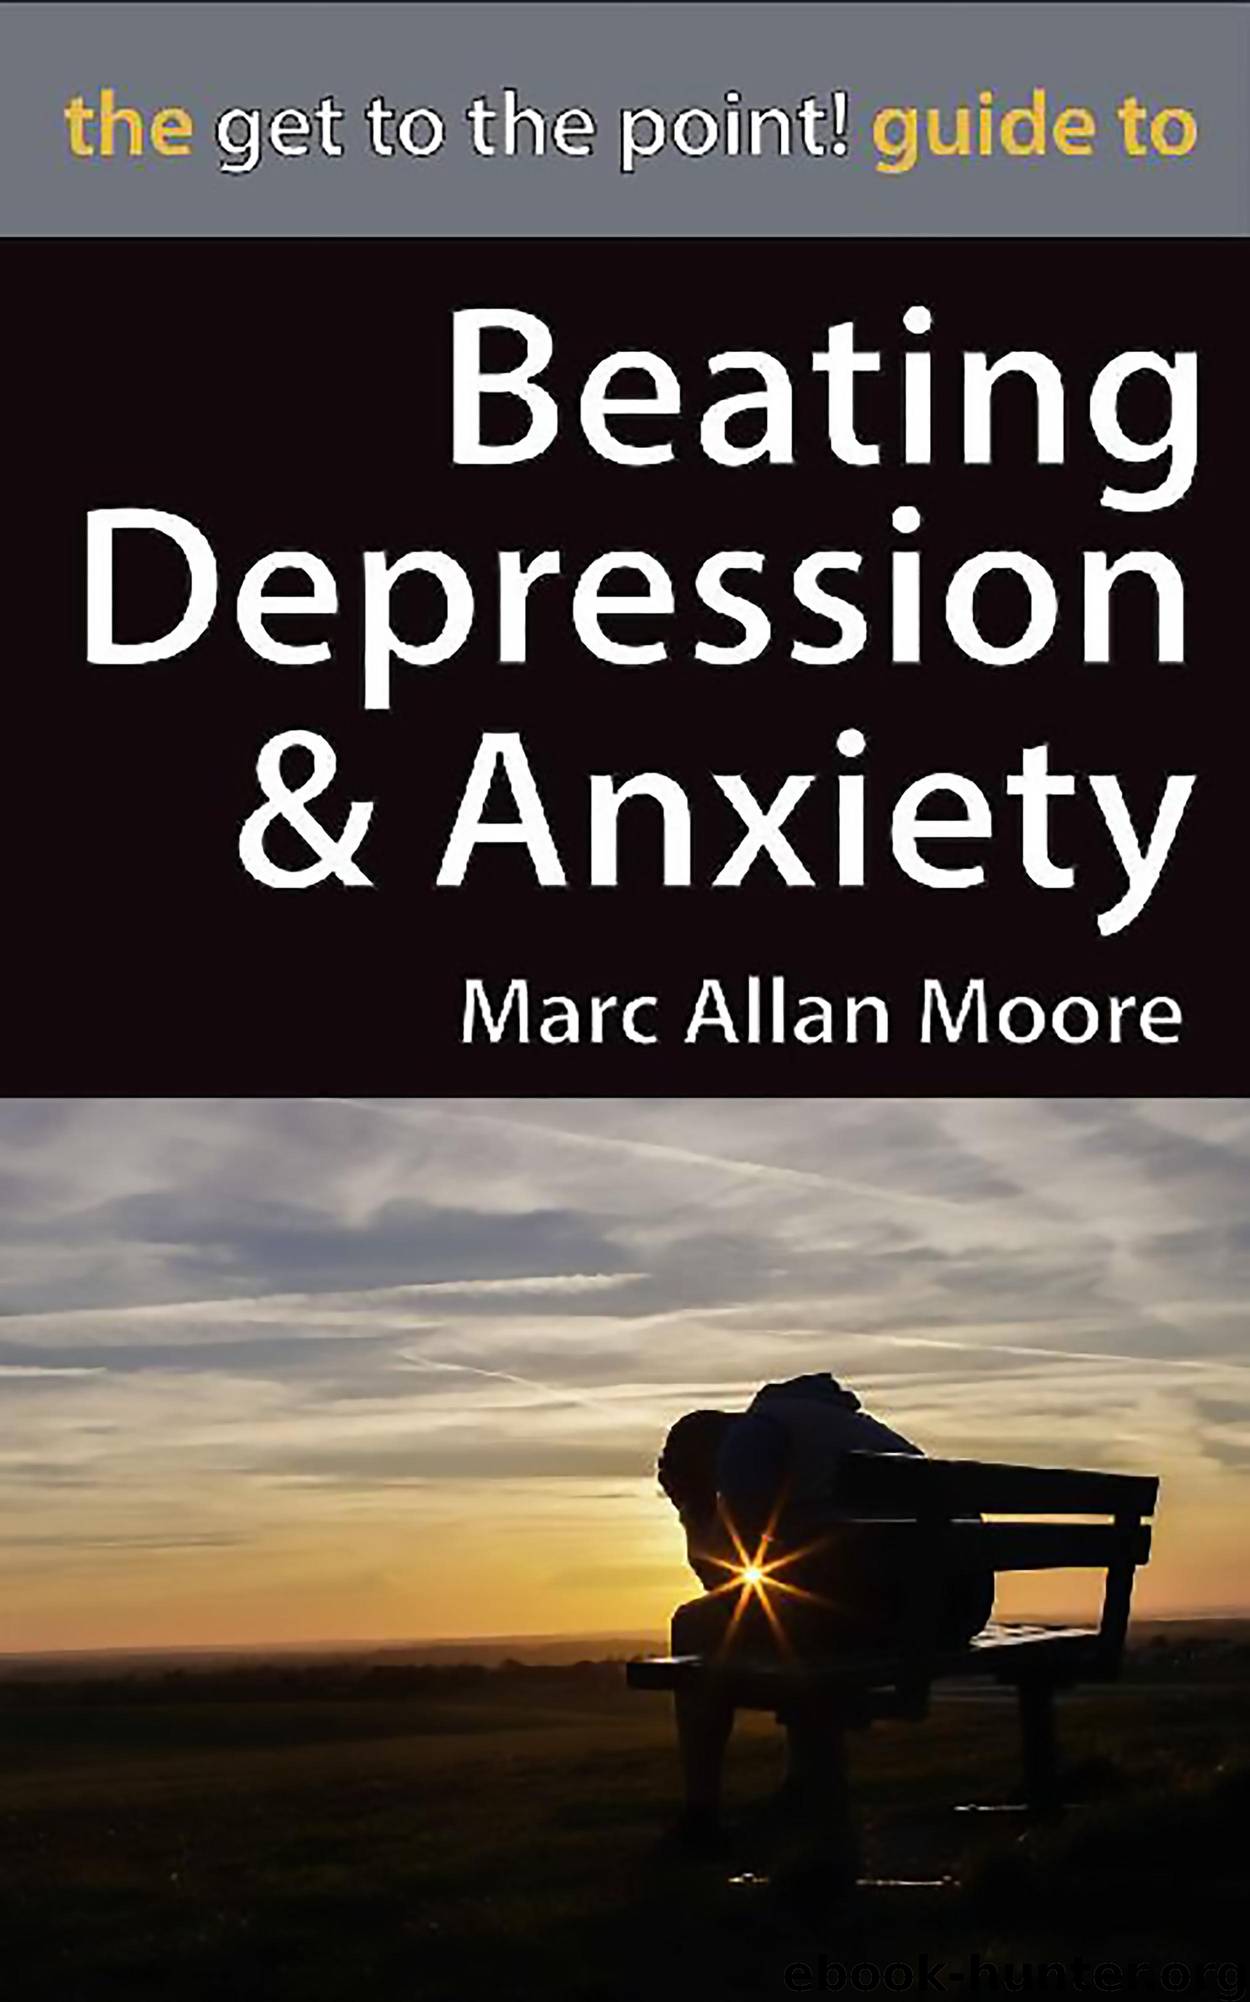 The Get to the Point! Guide to Beating Depression and Anxiety by Marc Allan Moore